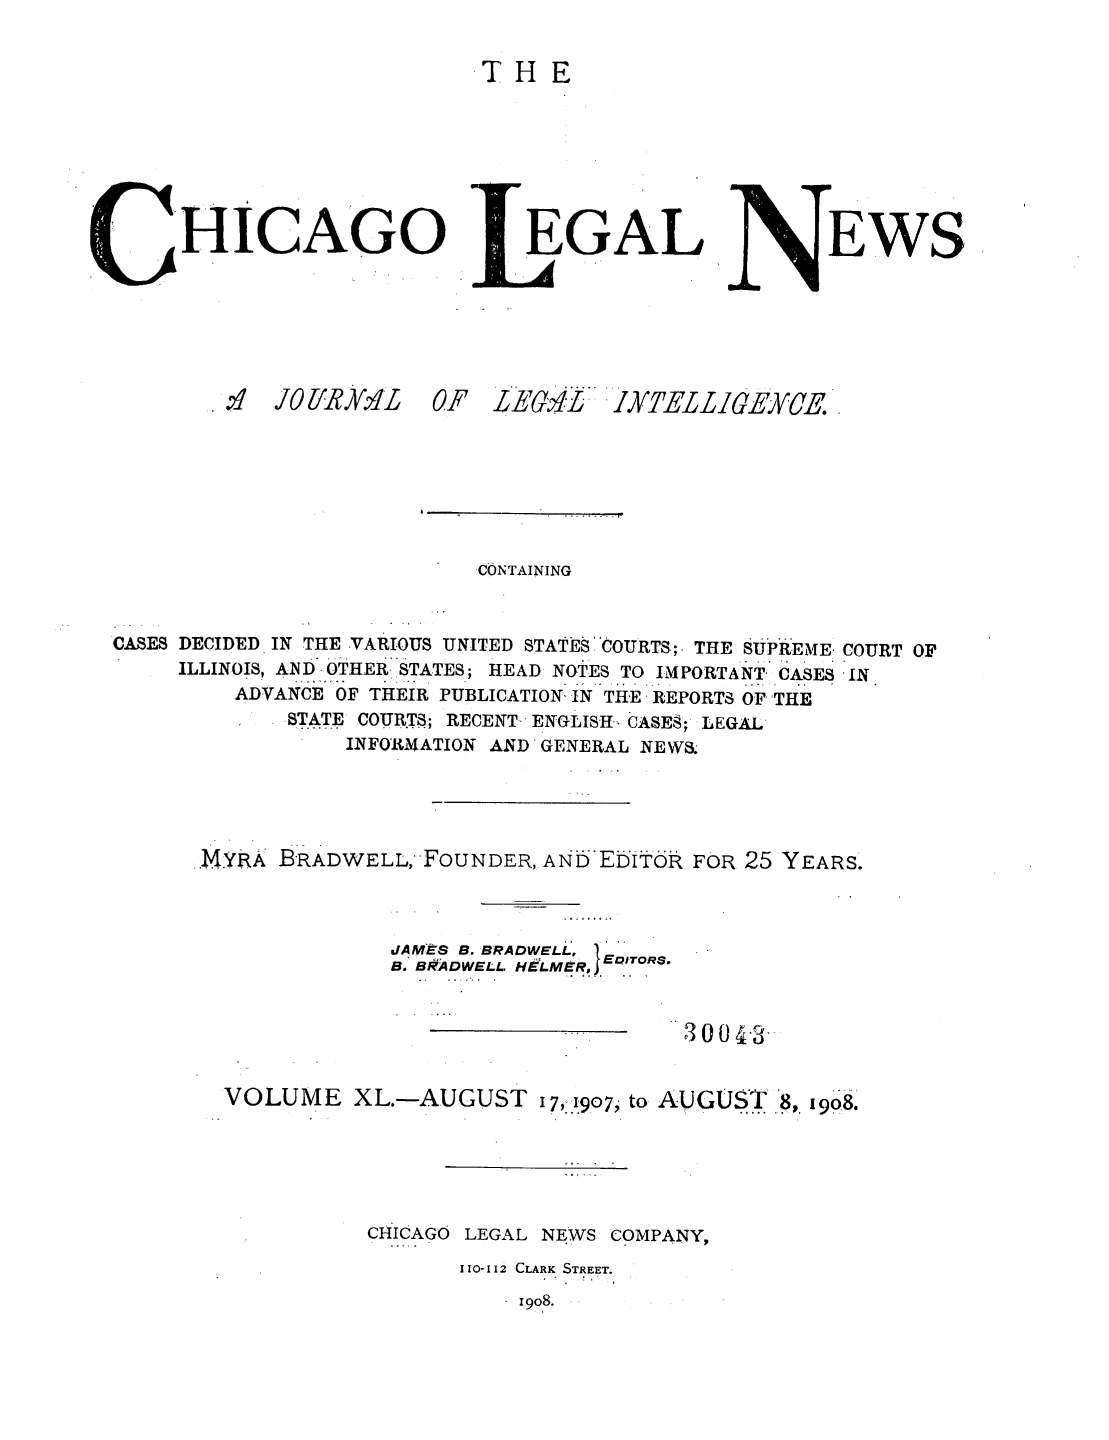 handle is hein.journals/chiclene40 and id is 1 raw text is: THEHICAGOEGALEWS.IA JO lJRYvvLOF I[,G. L L'Y]7ELLIGEYVE.CONTAININGCASES DECIDED IN THE VARIOUS UNITED STATES COURTS;. THE SUPREME. COURT OFILLINOIS, AND - OTHER,. STATES; HEAD NOTES TO IMPORTANT, CASES -INADVANCE OF THEIR PUBLICATION, IN THE REPORTS OF THESTATE COURTS; RECENT- ENGLISH- CASES; LEGALINFORMATION AND GENERAL NEWS..MYRA BRADWELLFOUNDER, AND EDITiR FOR 25 YEARS.JAMES B. BRADWELL,B. BRA DWELL H&L.M&Rj EQ .ITO R8.300.3.VOLUME XL.-AUGUST 17,-1907, to AUGUST .8, 908.CHICAGO LEGAL NEWS COMPANY,110-112 CLARK STREET.1908.